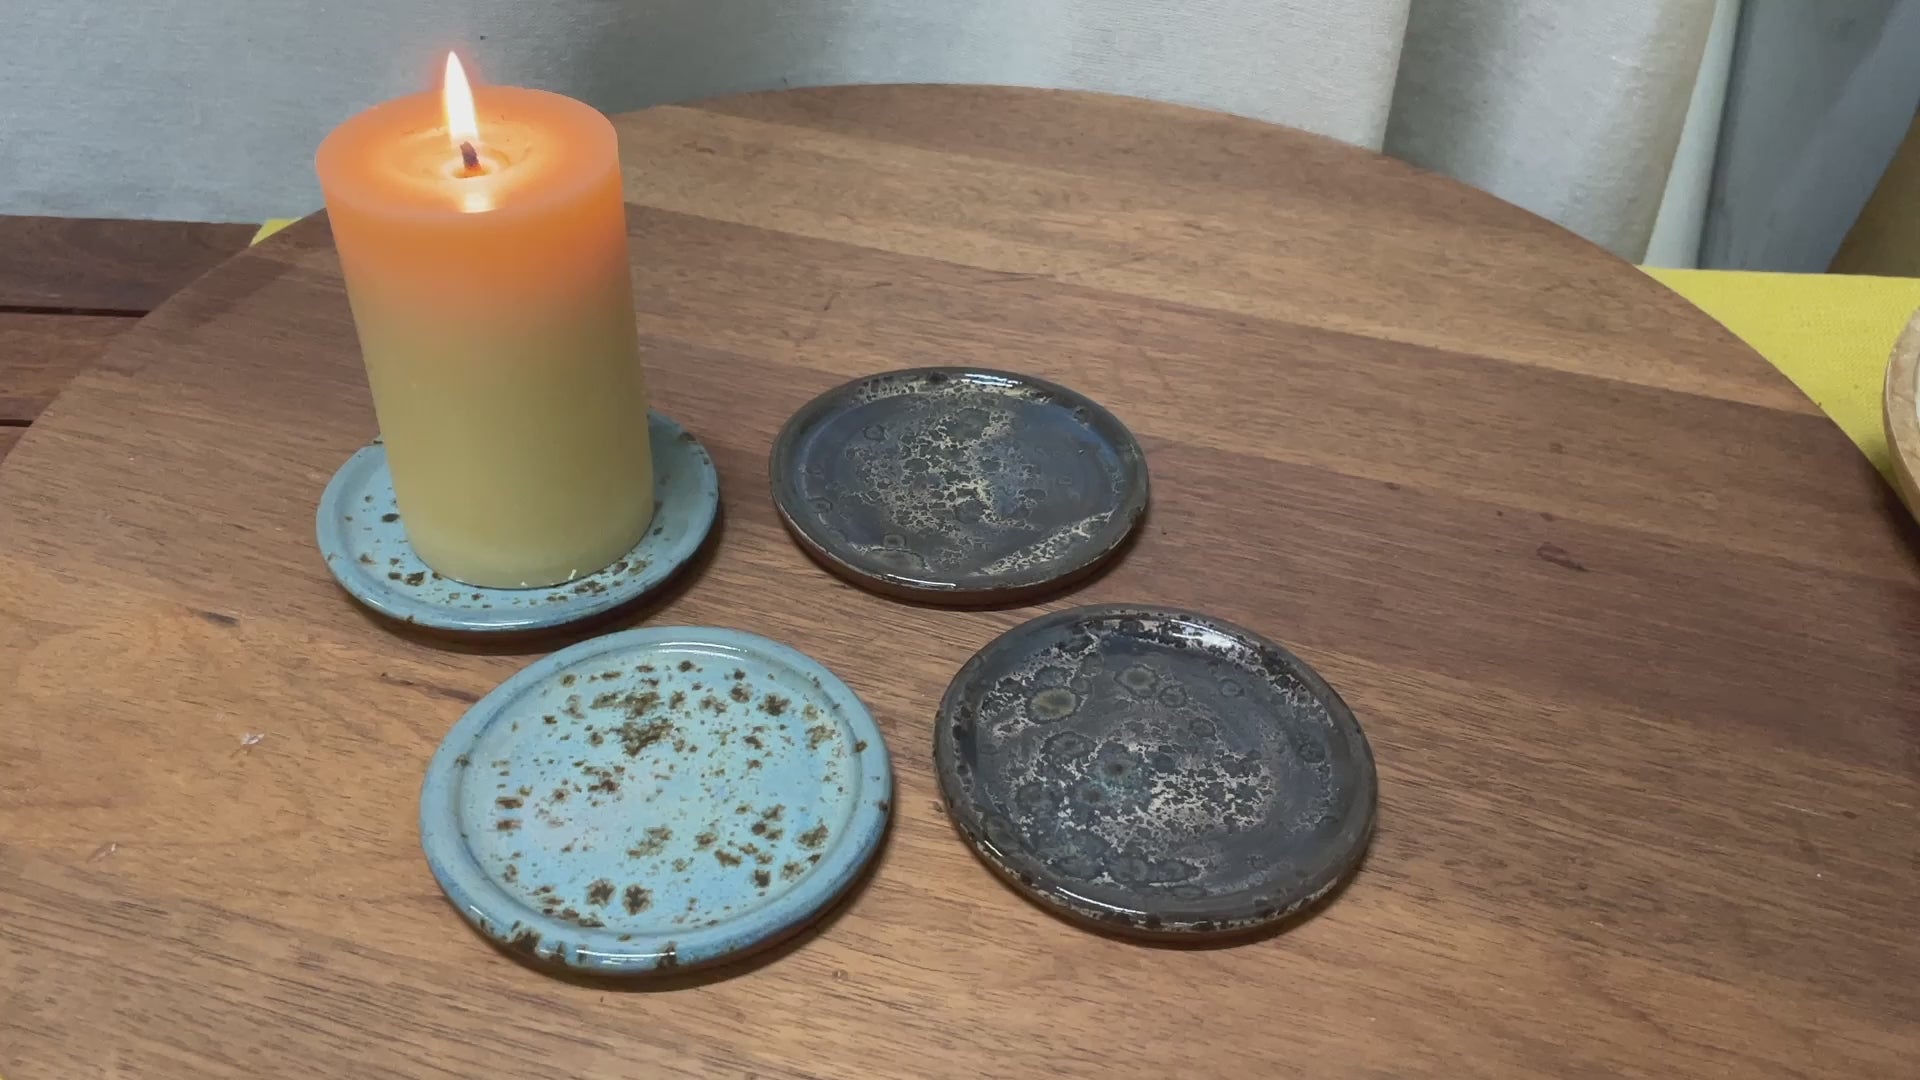 Video showing our hand thrown ceramic candle plates